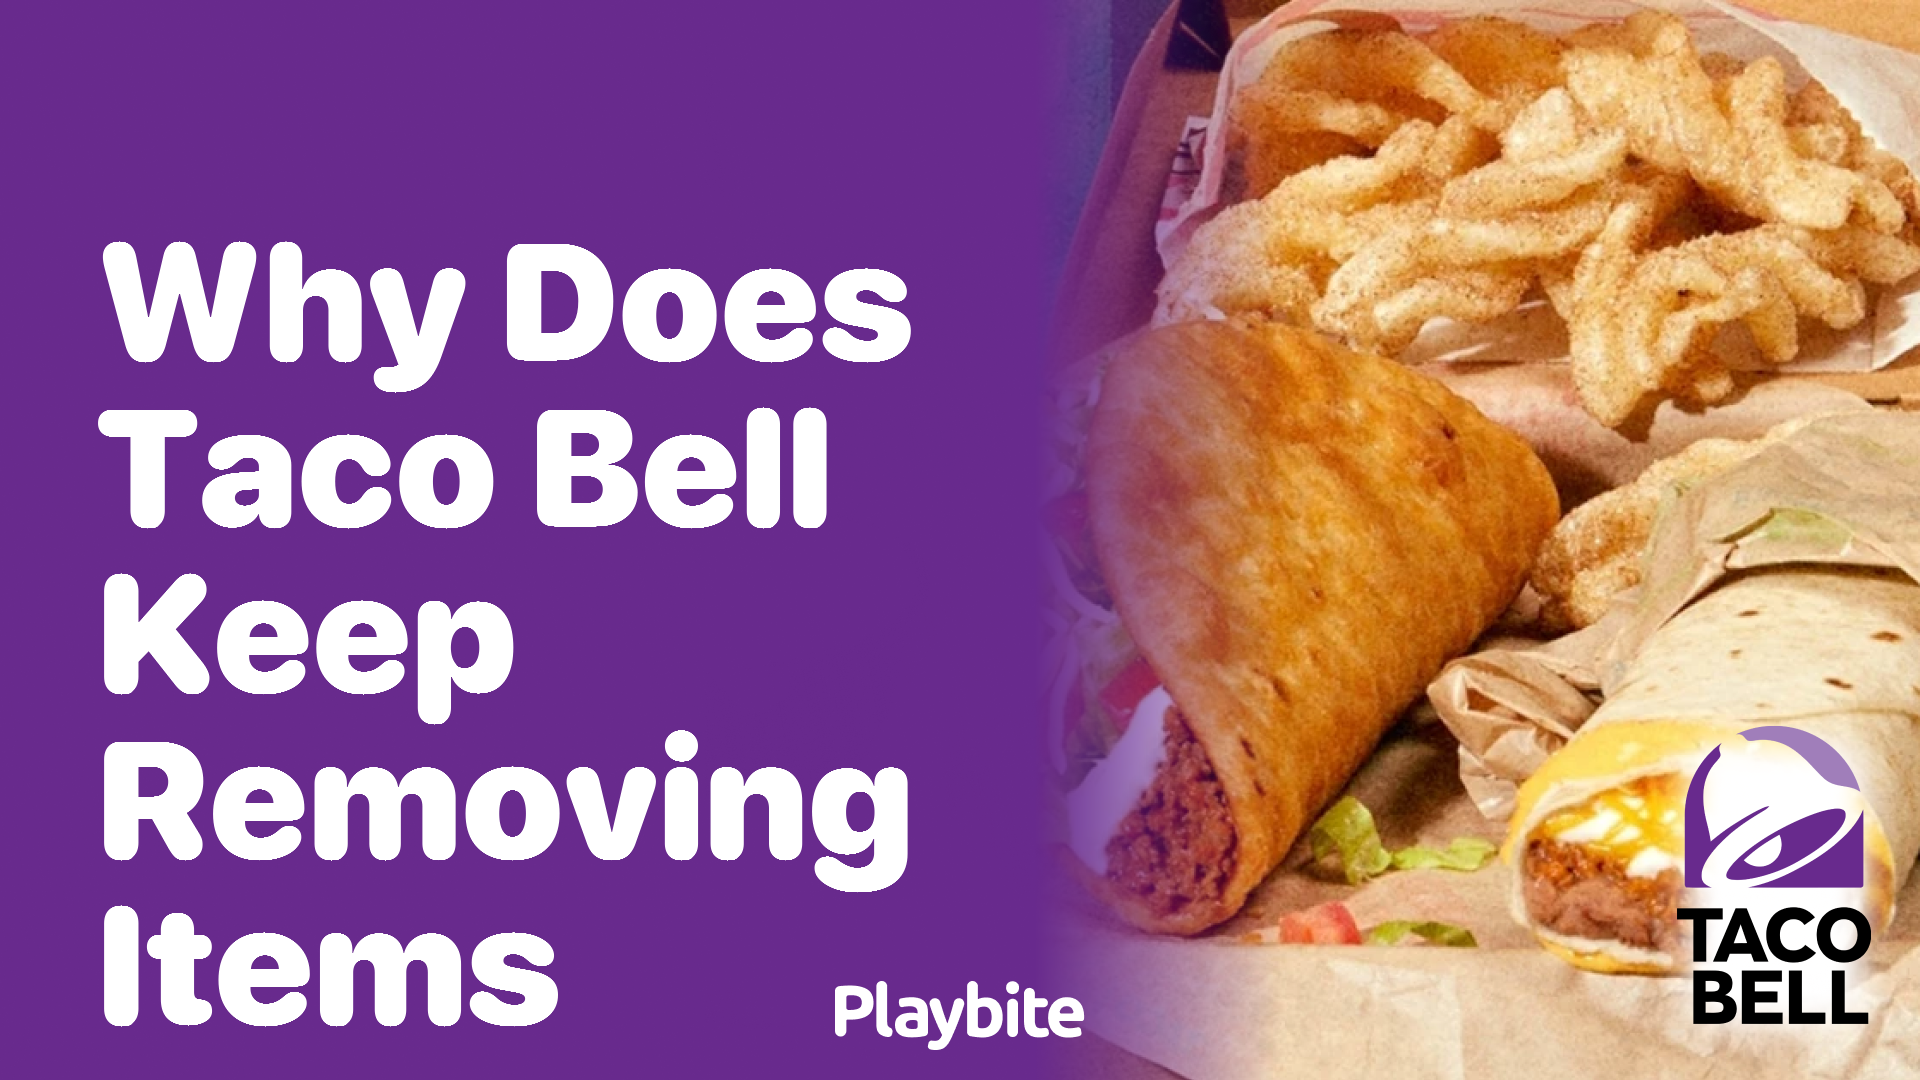 Why Does Taco Bell Keep Removing Items from Their Menu?